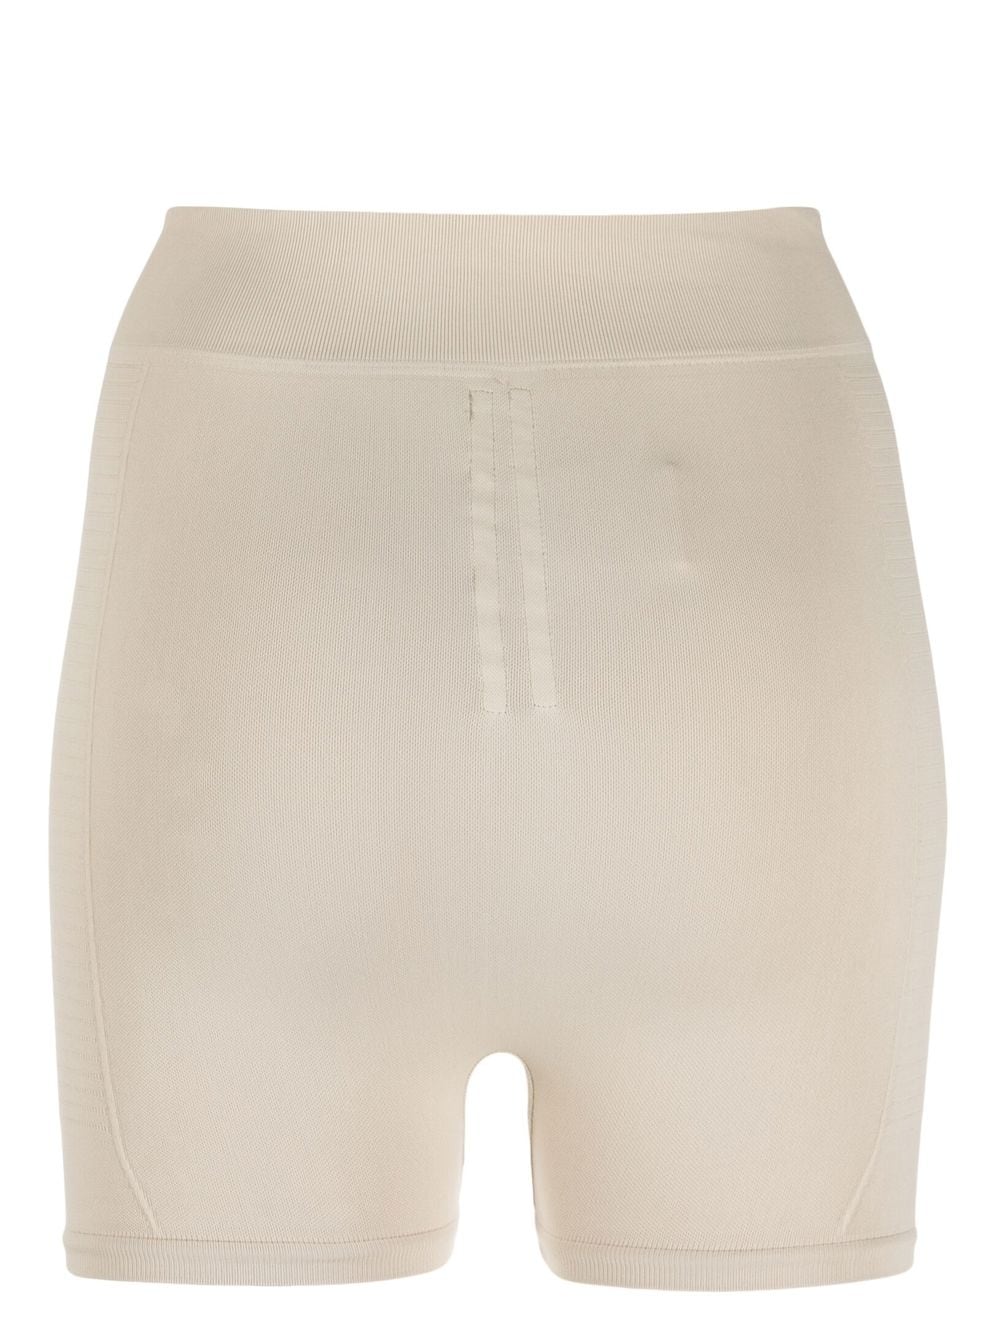 Shorts a coste in bianco crema - donna RICK OWENS | RO01C5651KSP08